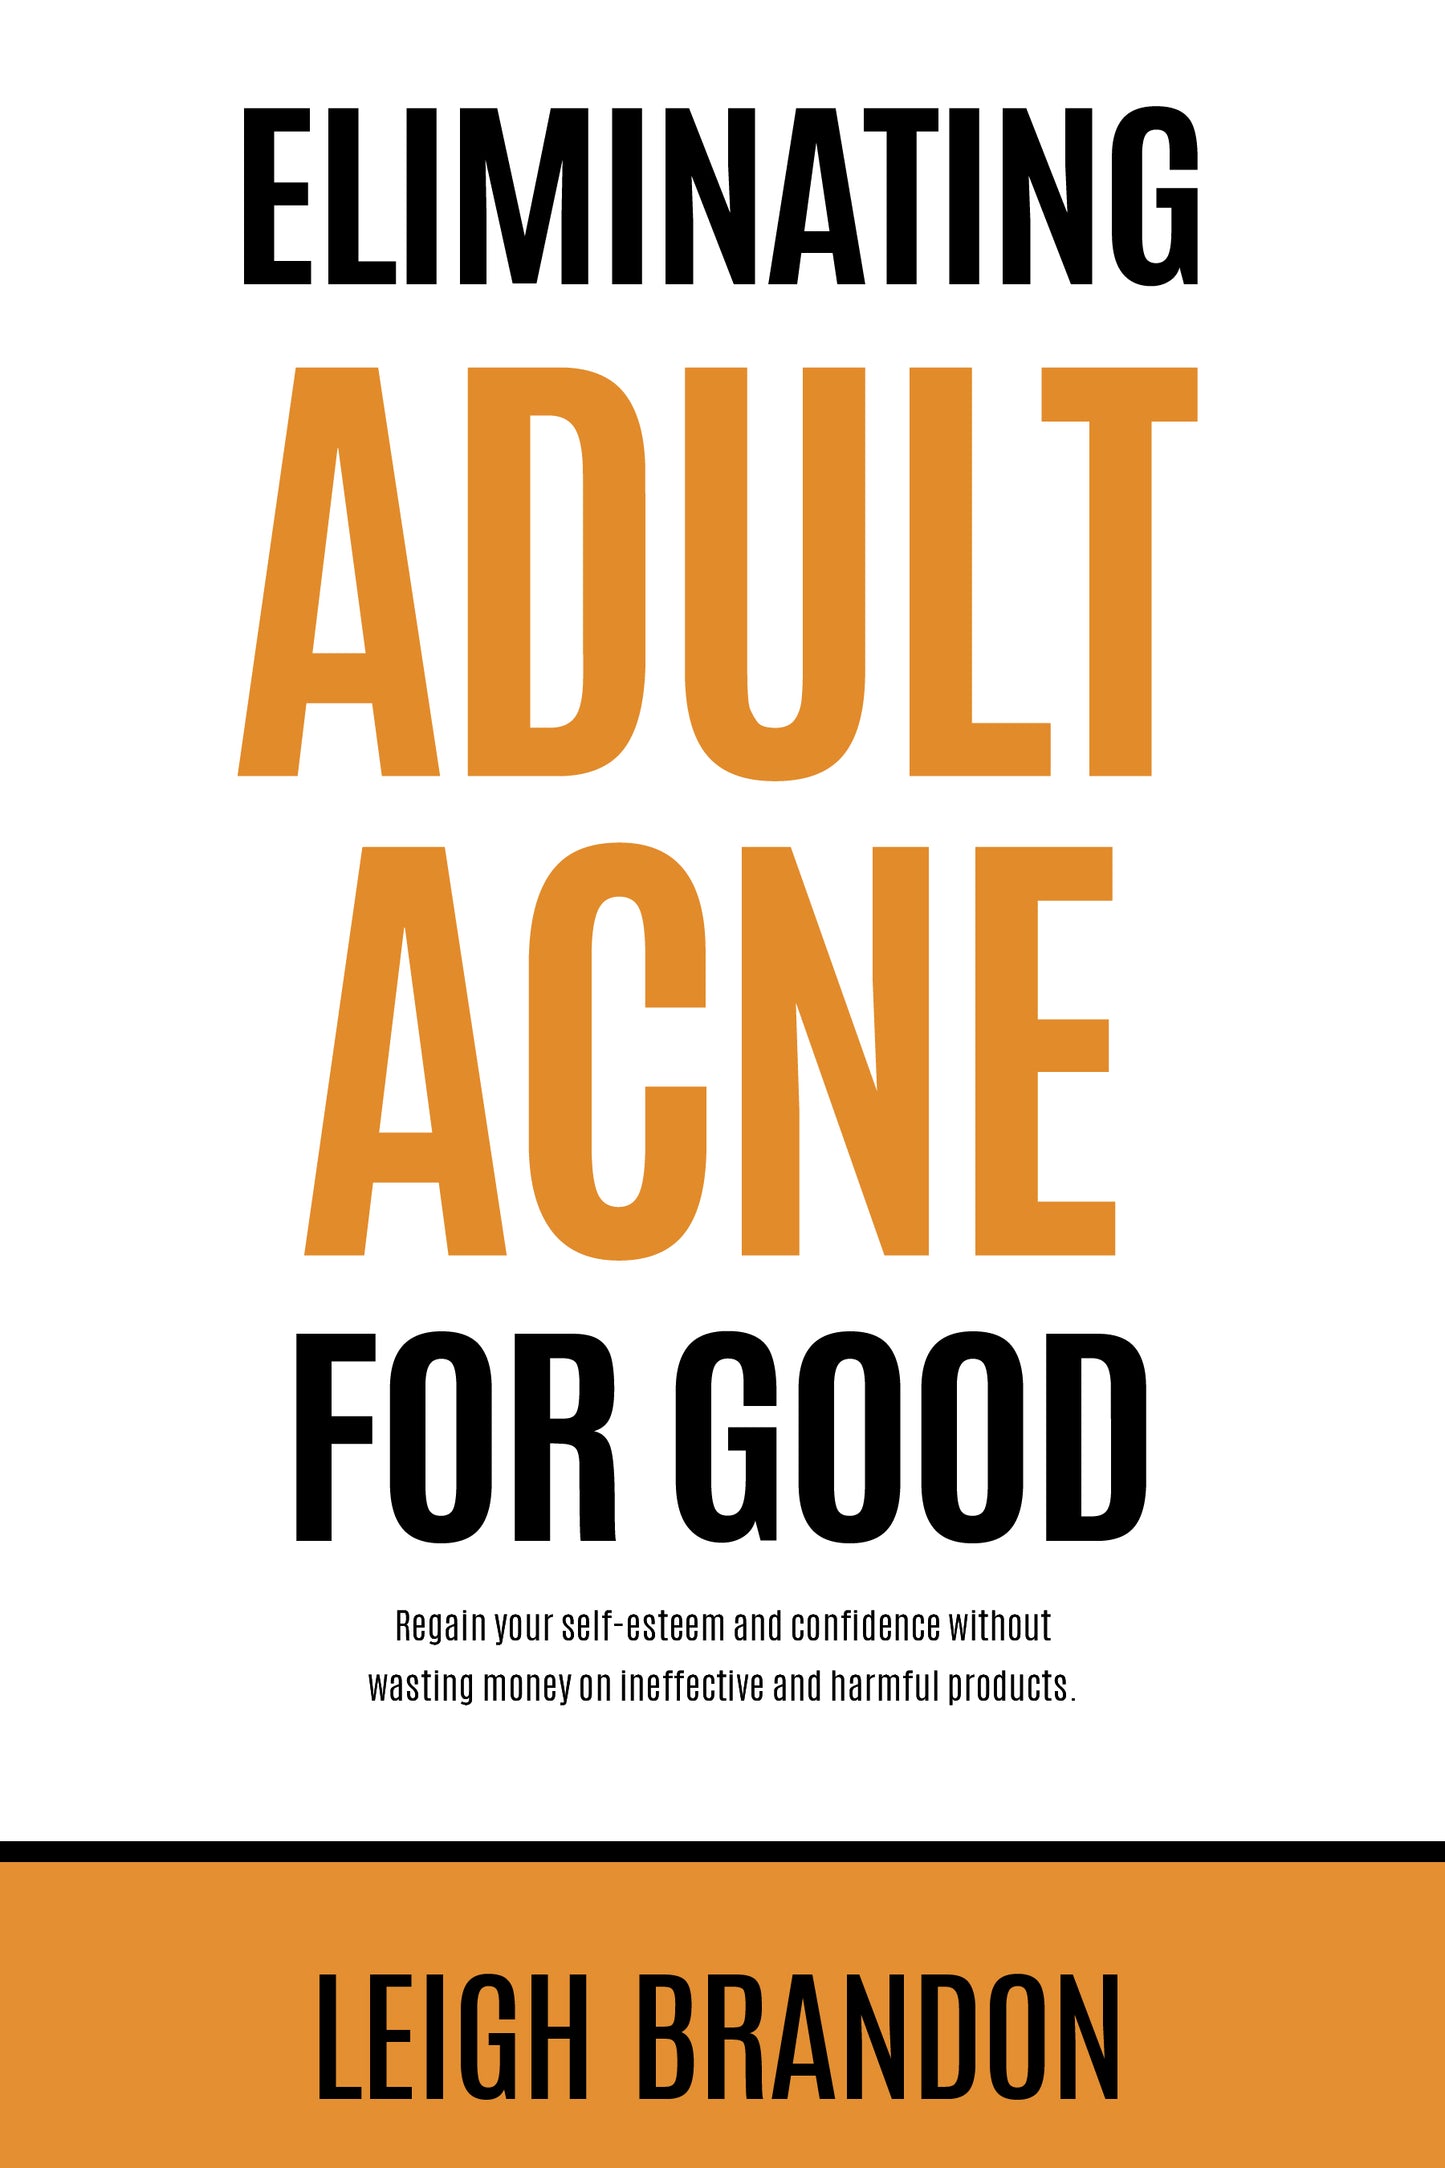 Eliminating Adult Acne for Good